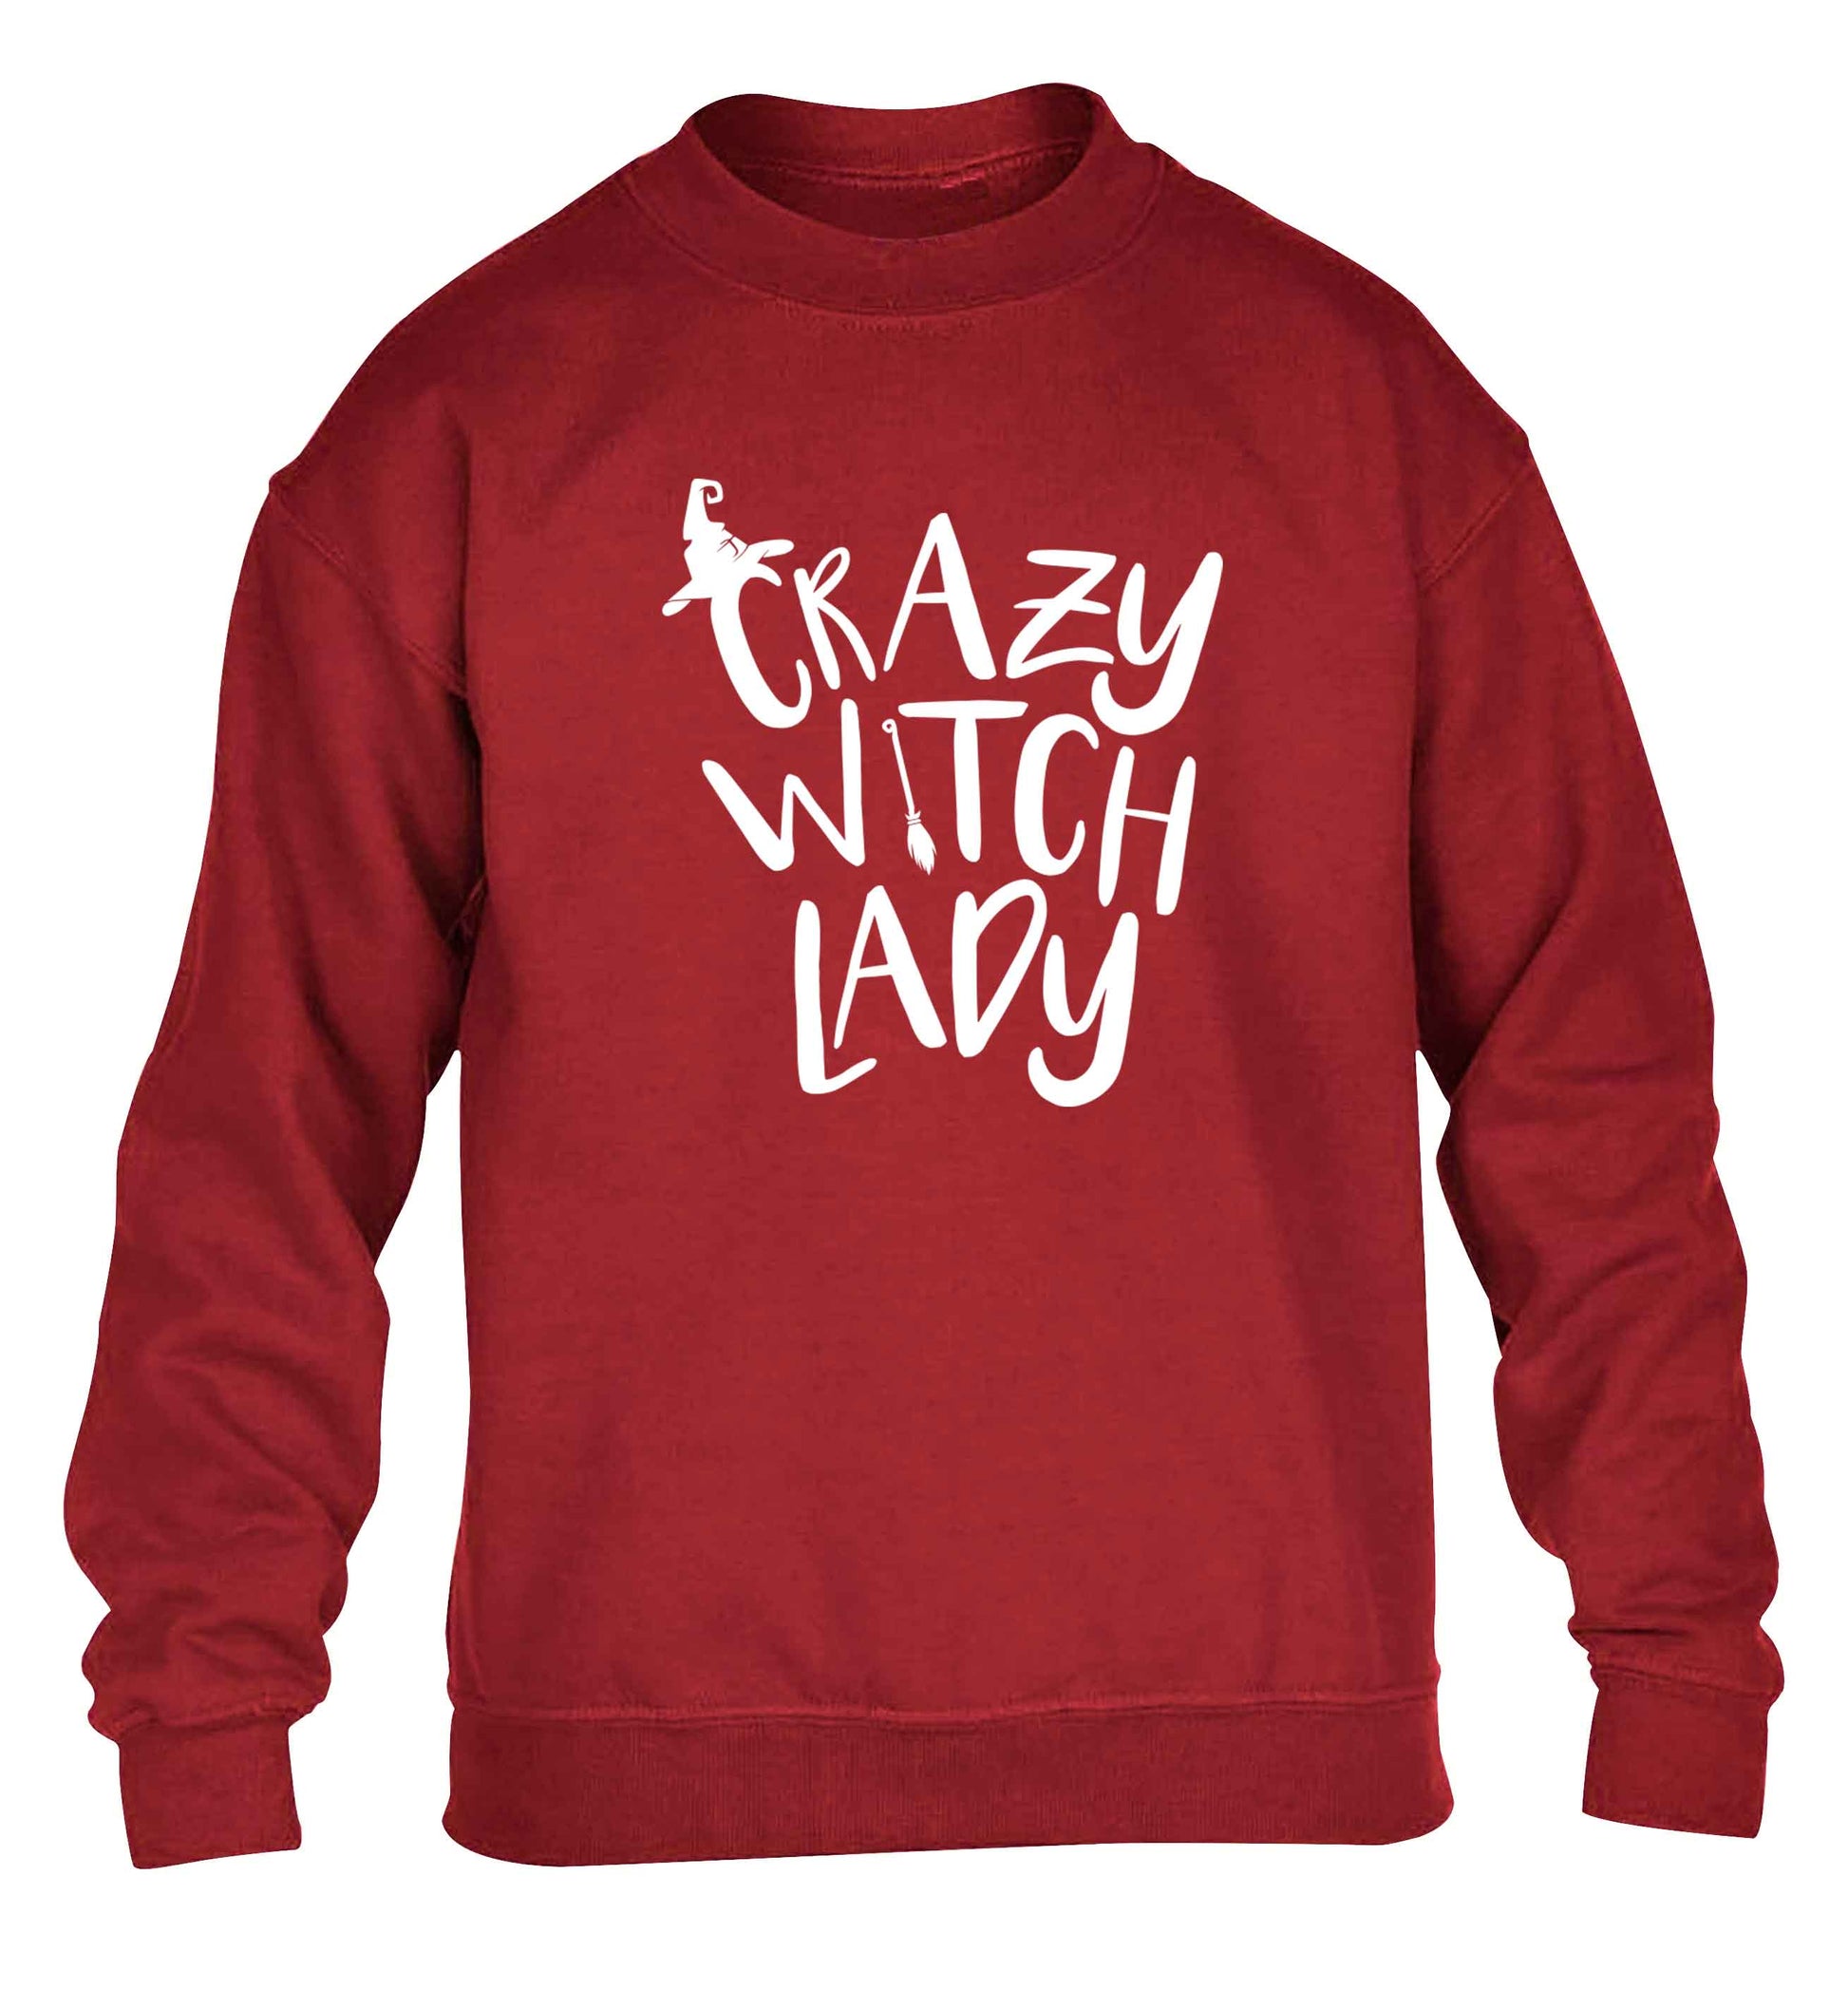 Crazy witch lady children's grey sweater 12-13 Years